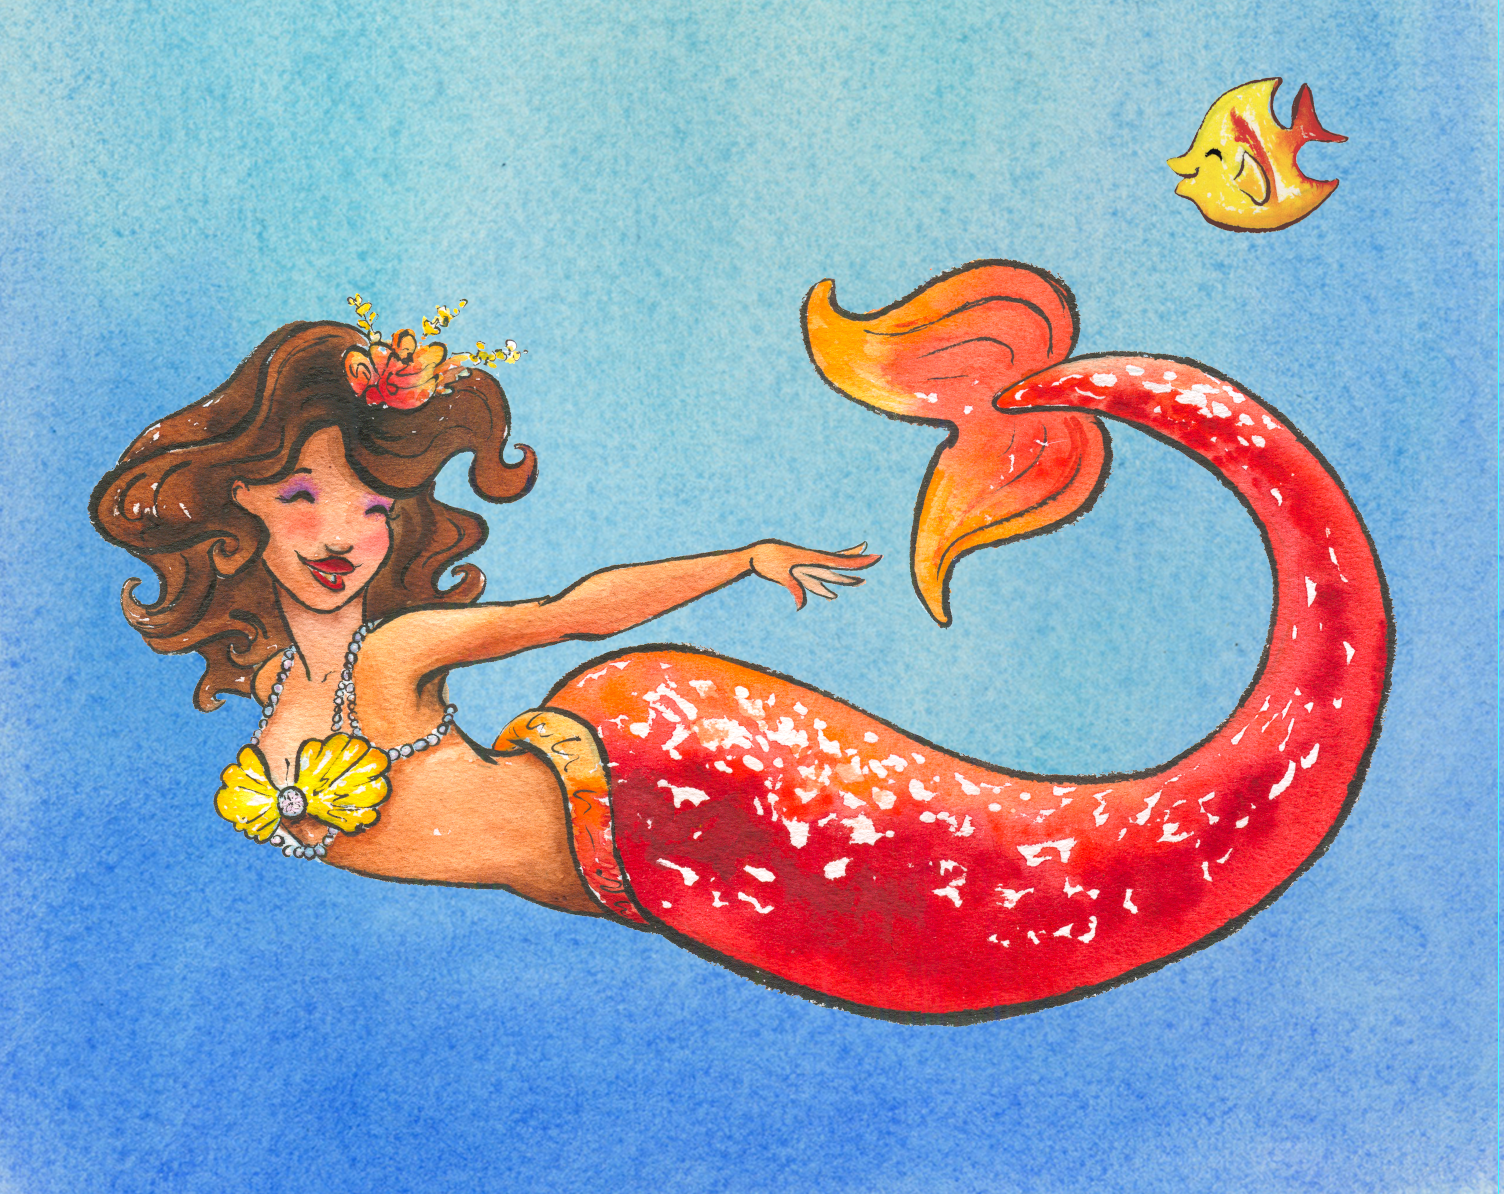 Mermaid Ruby Art Print. Free Personalization Available.